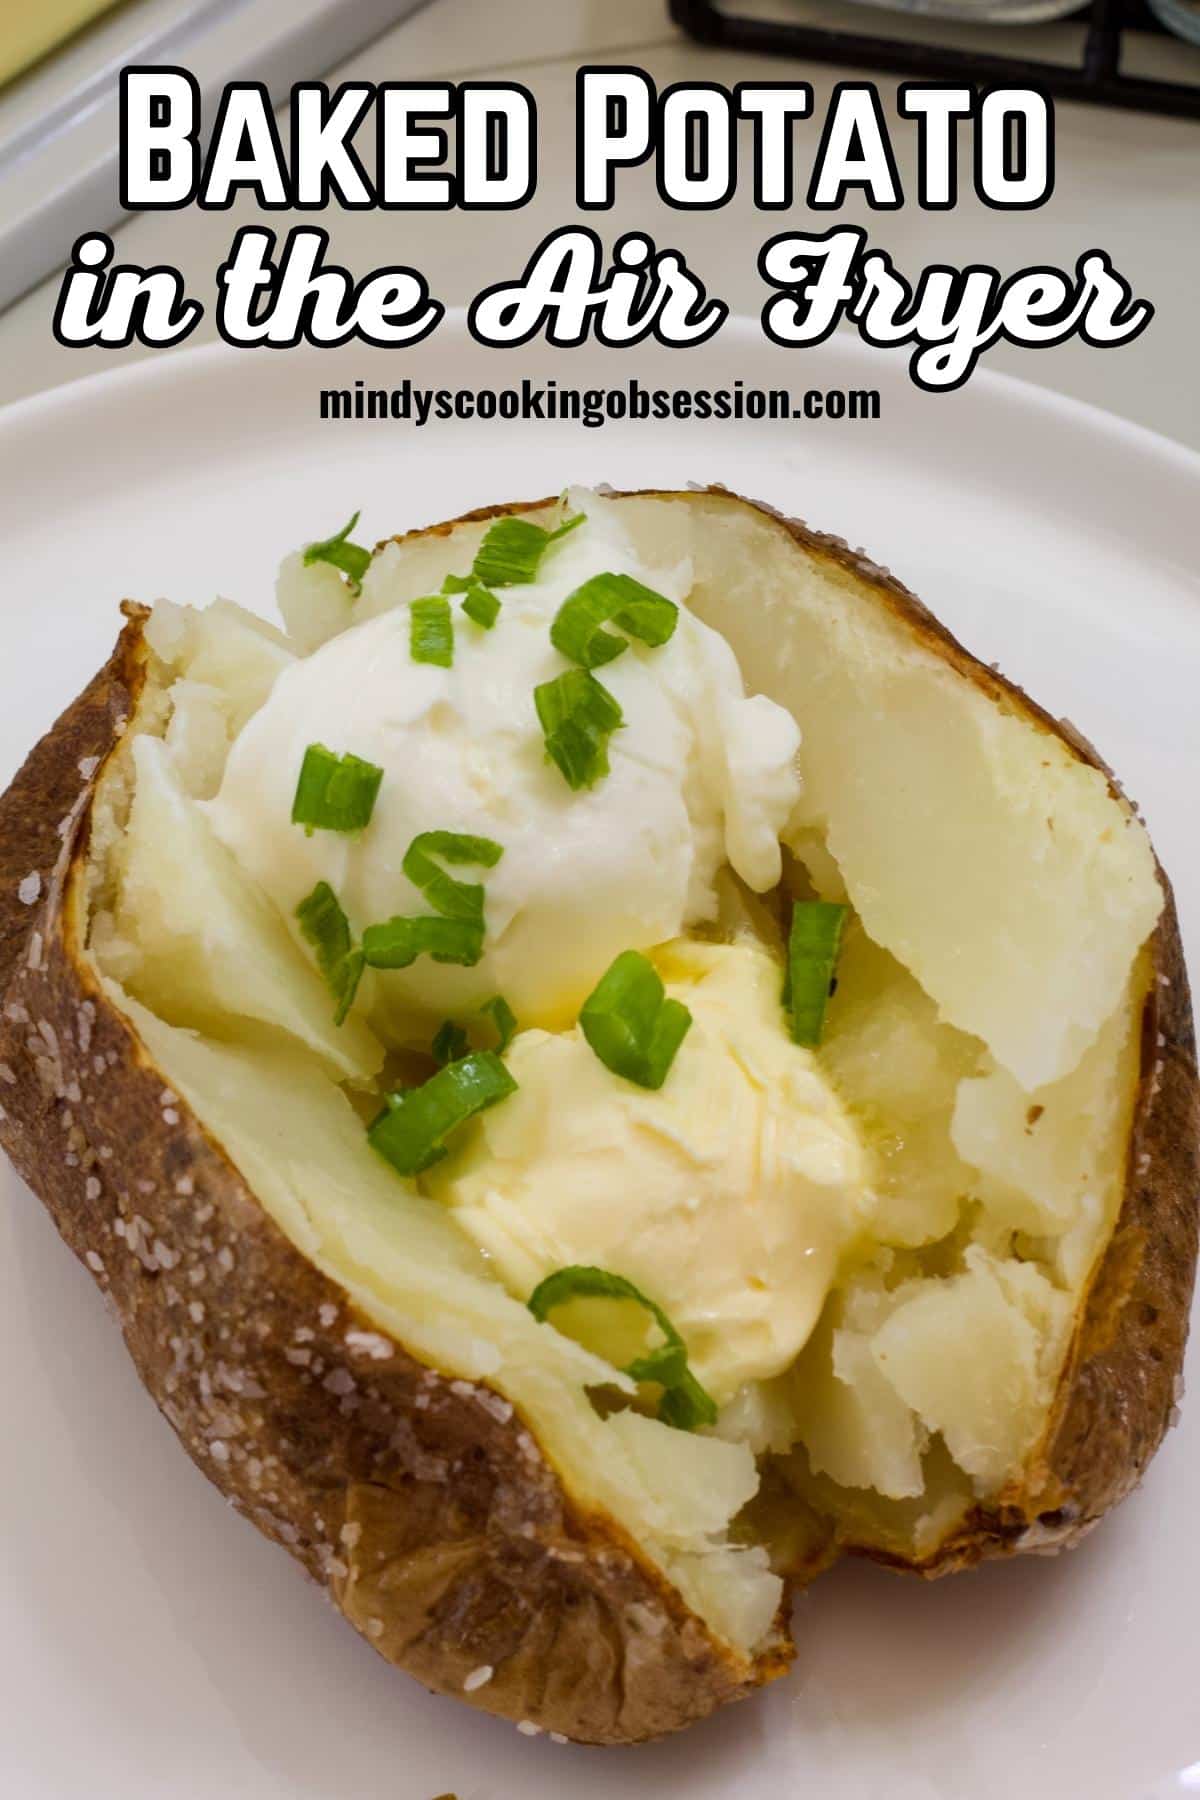 Quick and Easy Air Fryer Baked Potato Recipe makes the perfect easy side dish or entree in a fraction of the time using basic ingredients. via @mindyscookingobsession